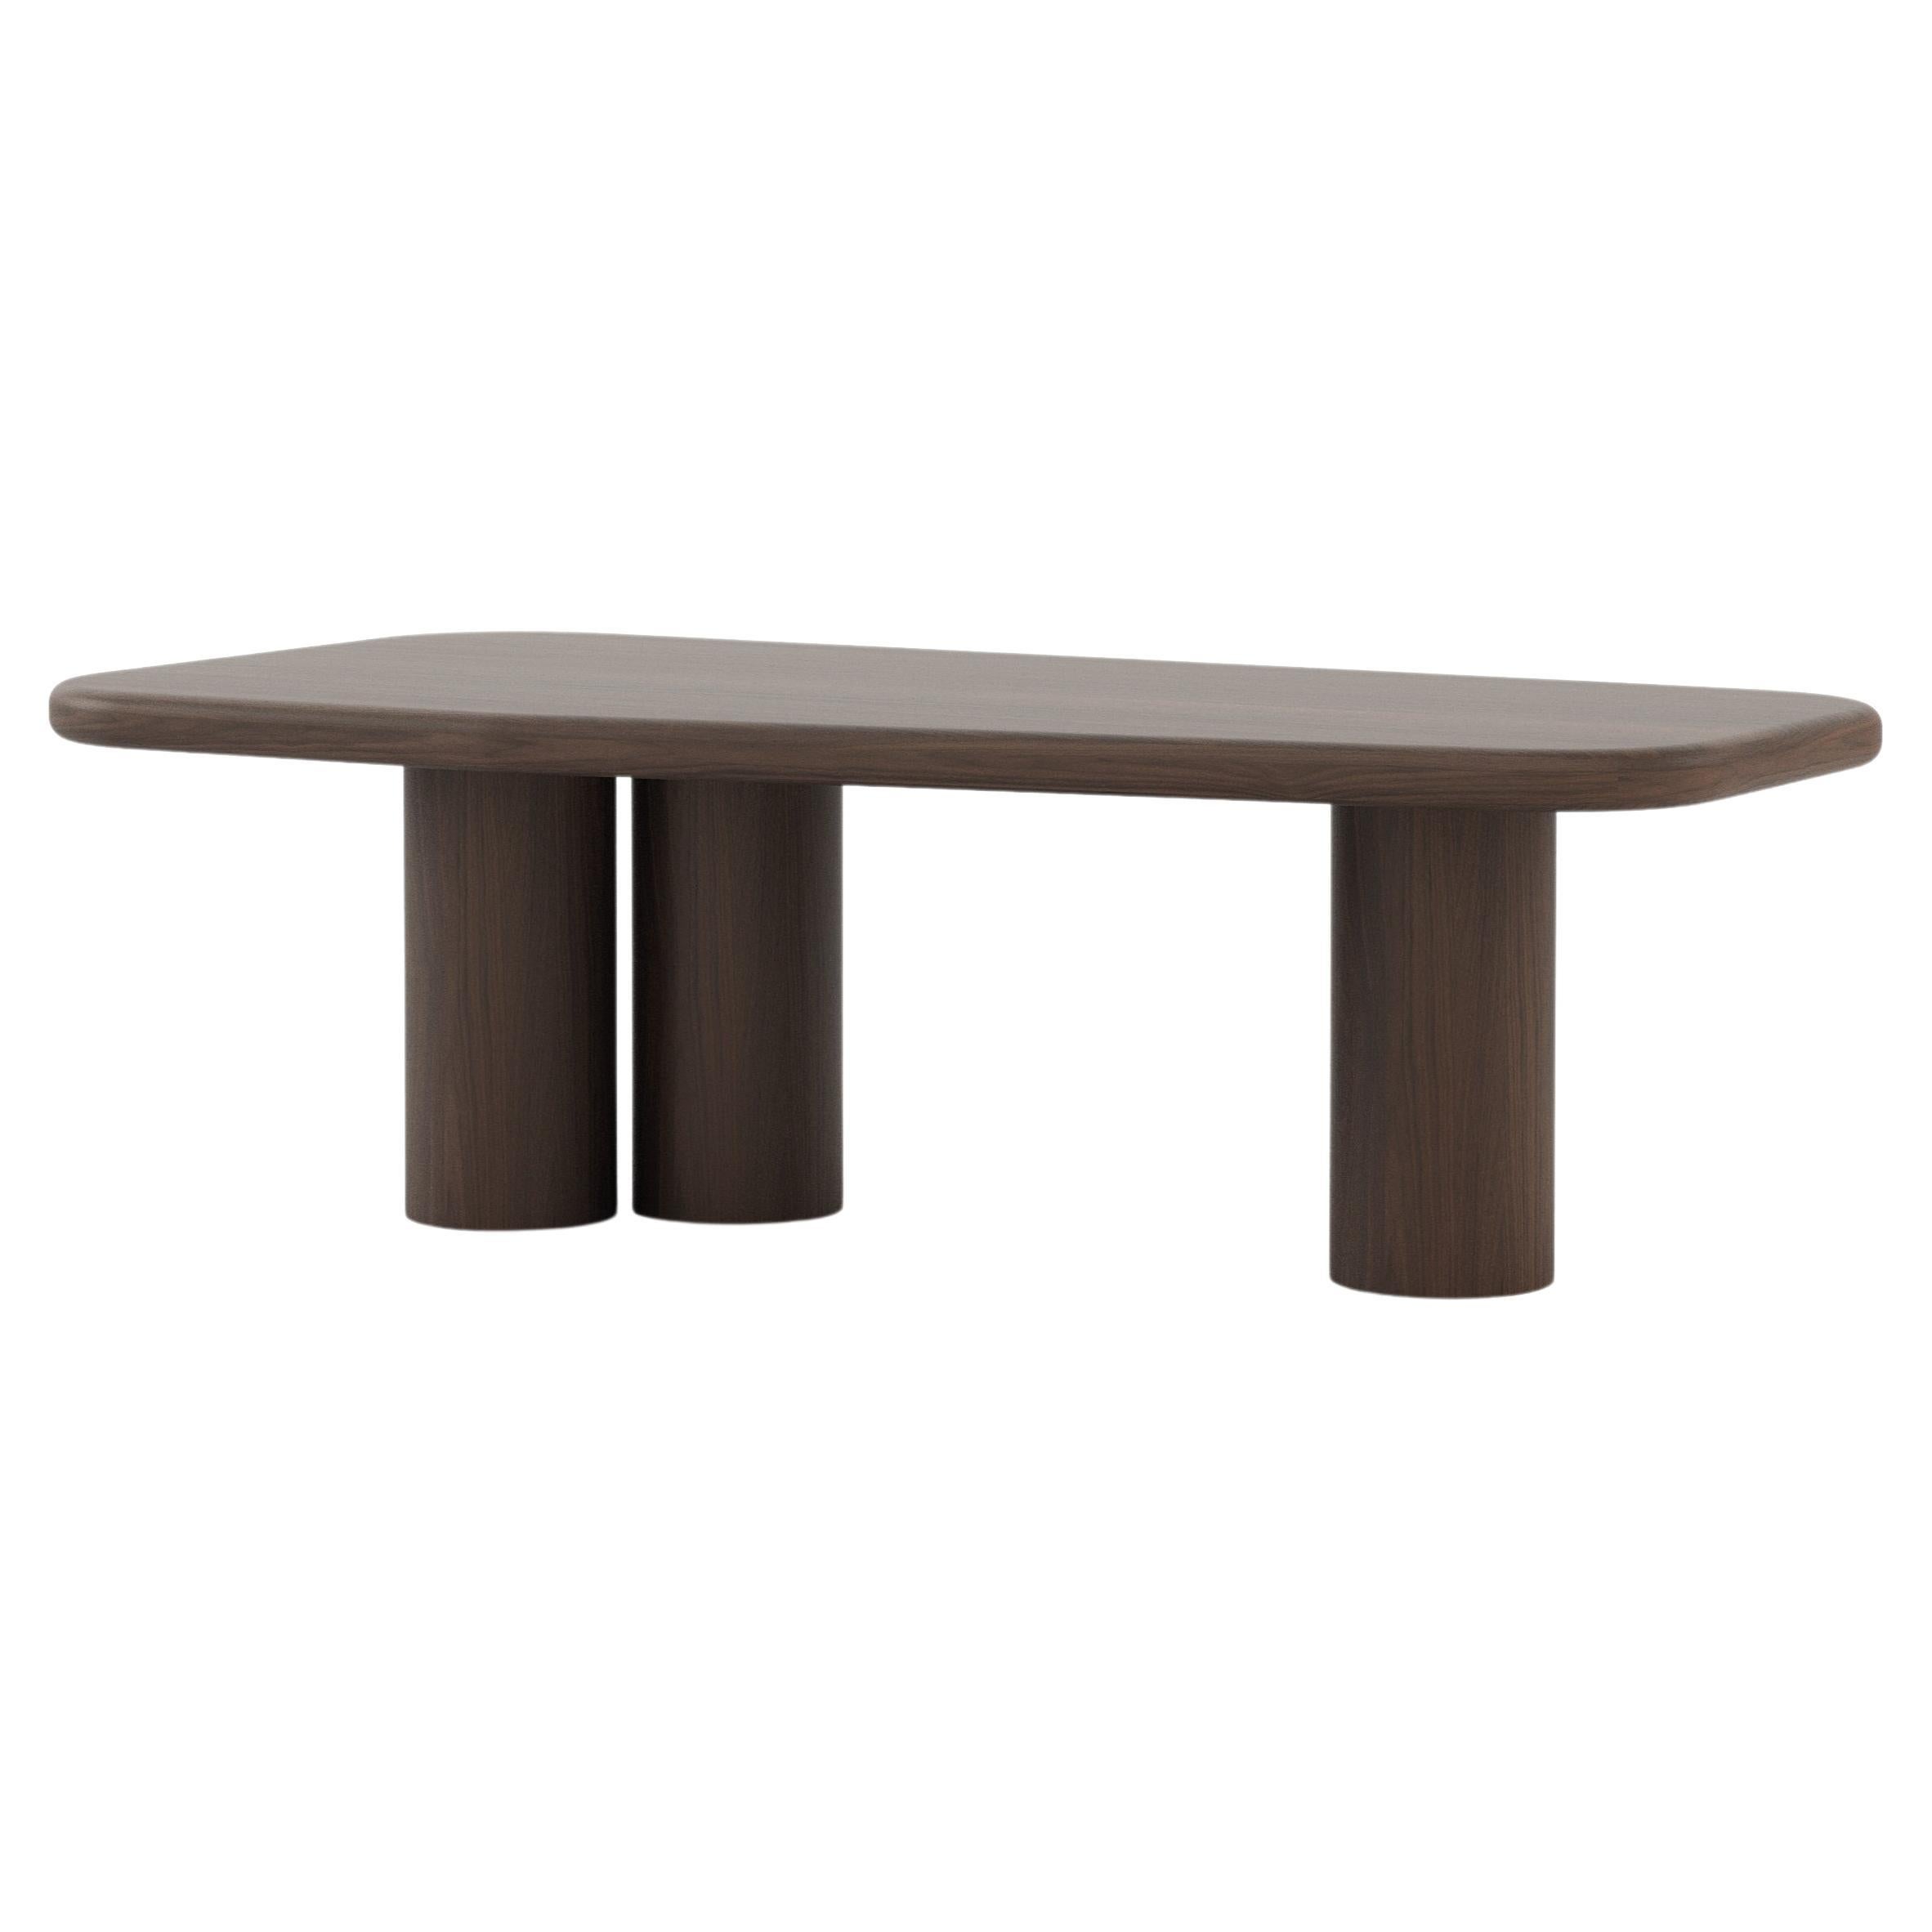 Organic Modern Natur Dining Table Made with Walnut, Handmade by Stylish Club For Sale